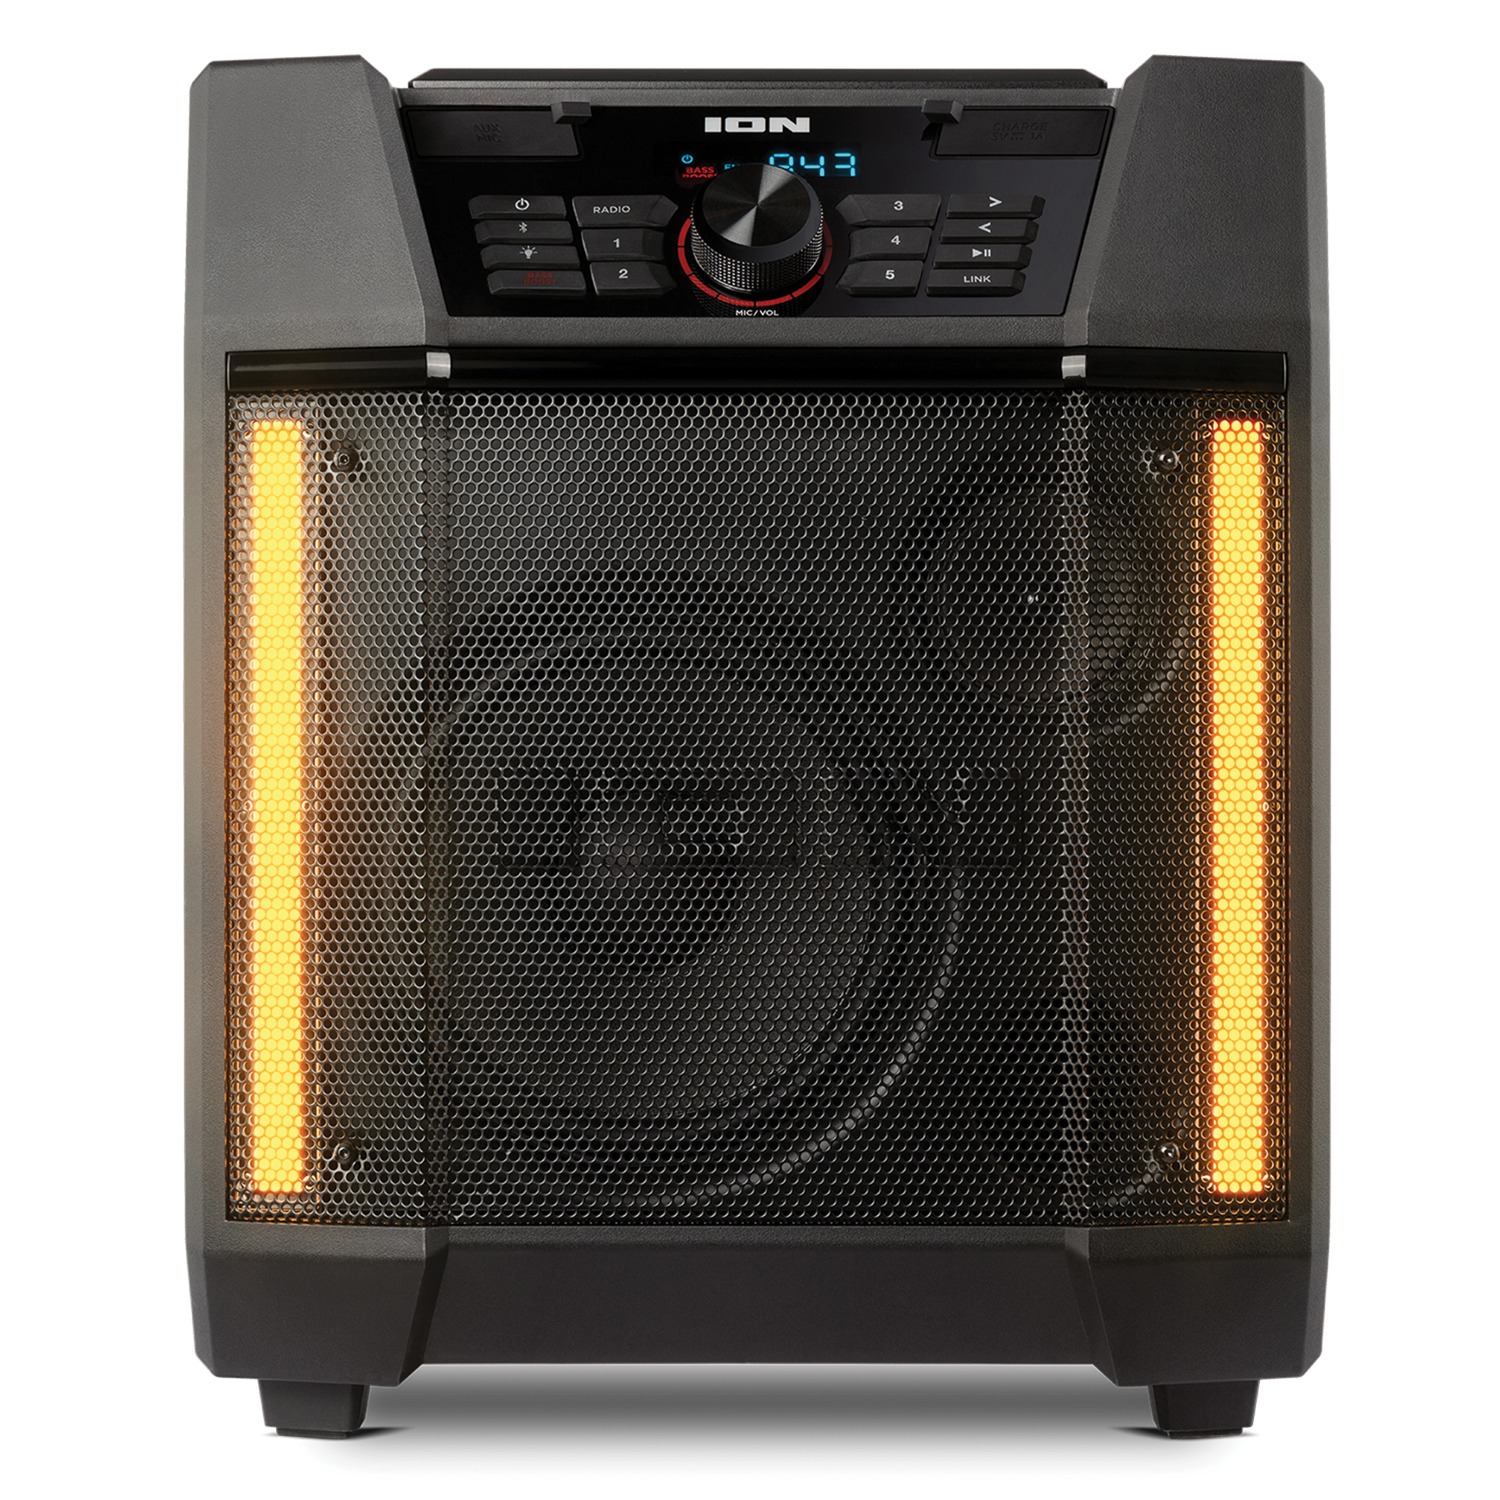 ION IPA131 Adventurer 8-Inch 100-Watt Portable Weather-Resistant Bluetooth PA Speaker with Light Bars and Microphone - image 3 of 5